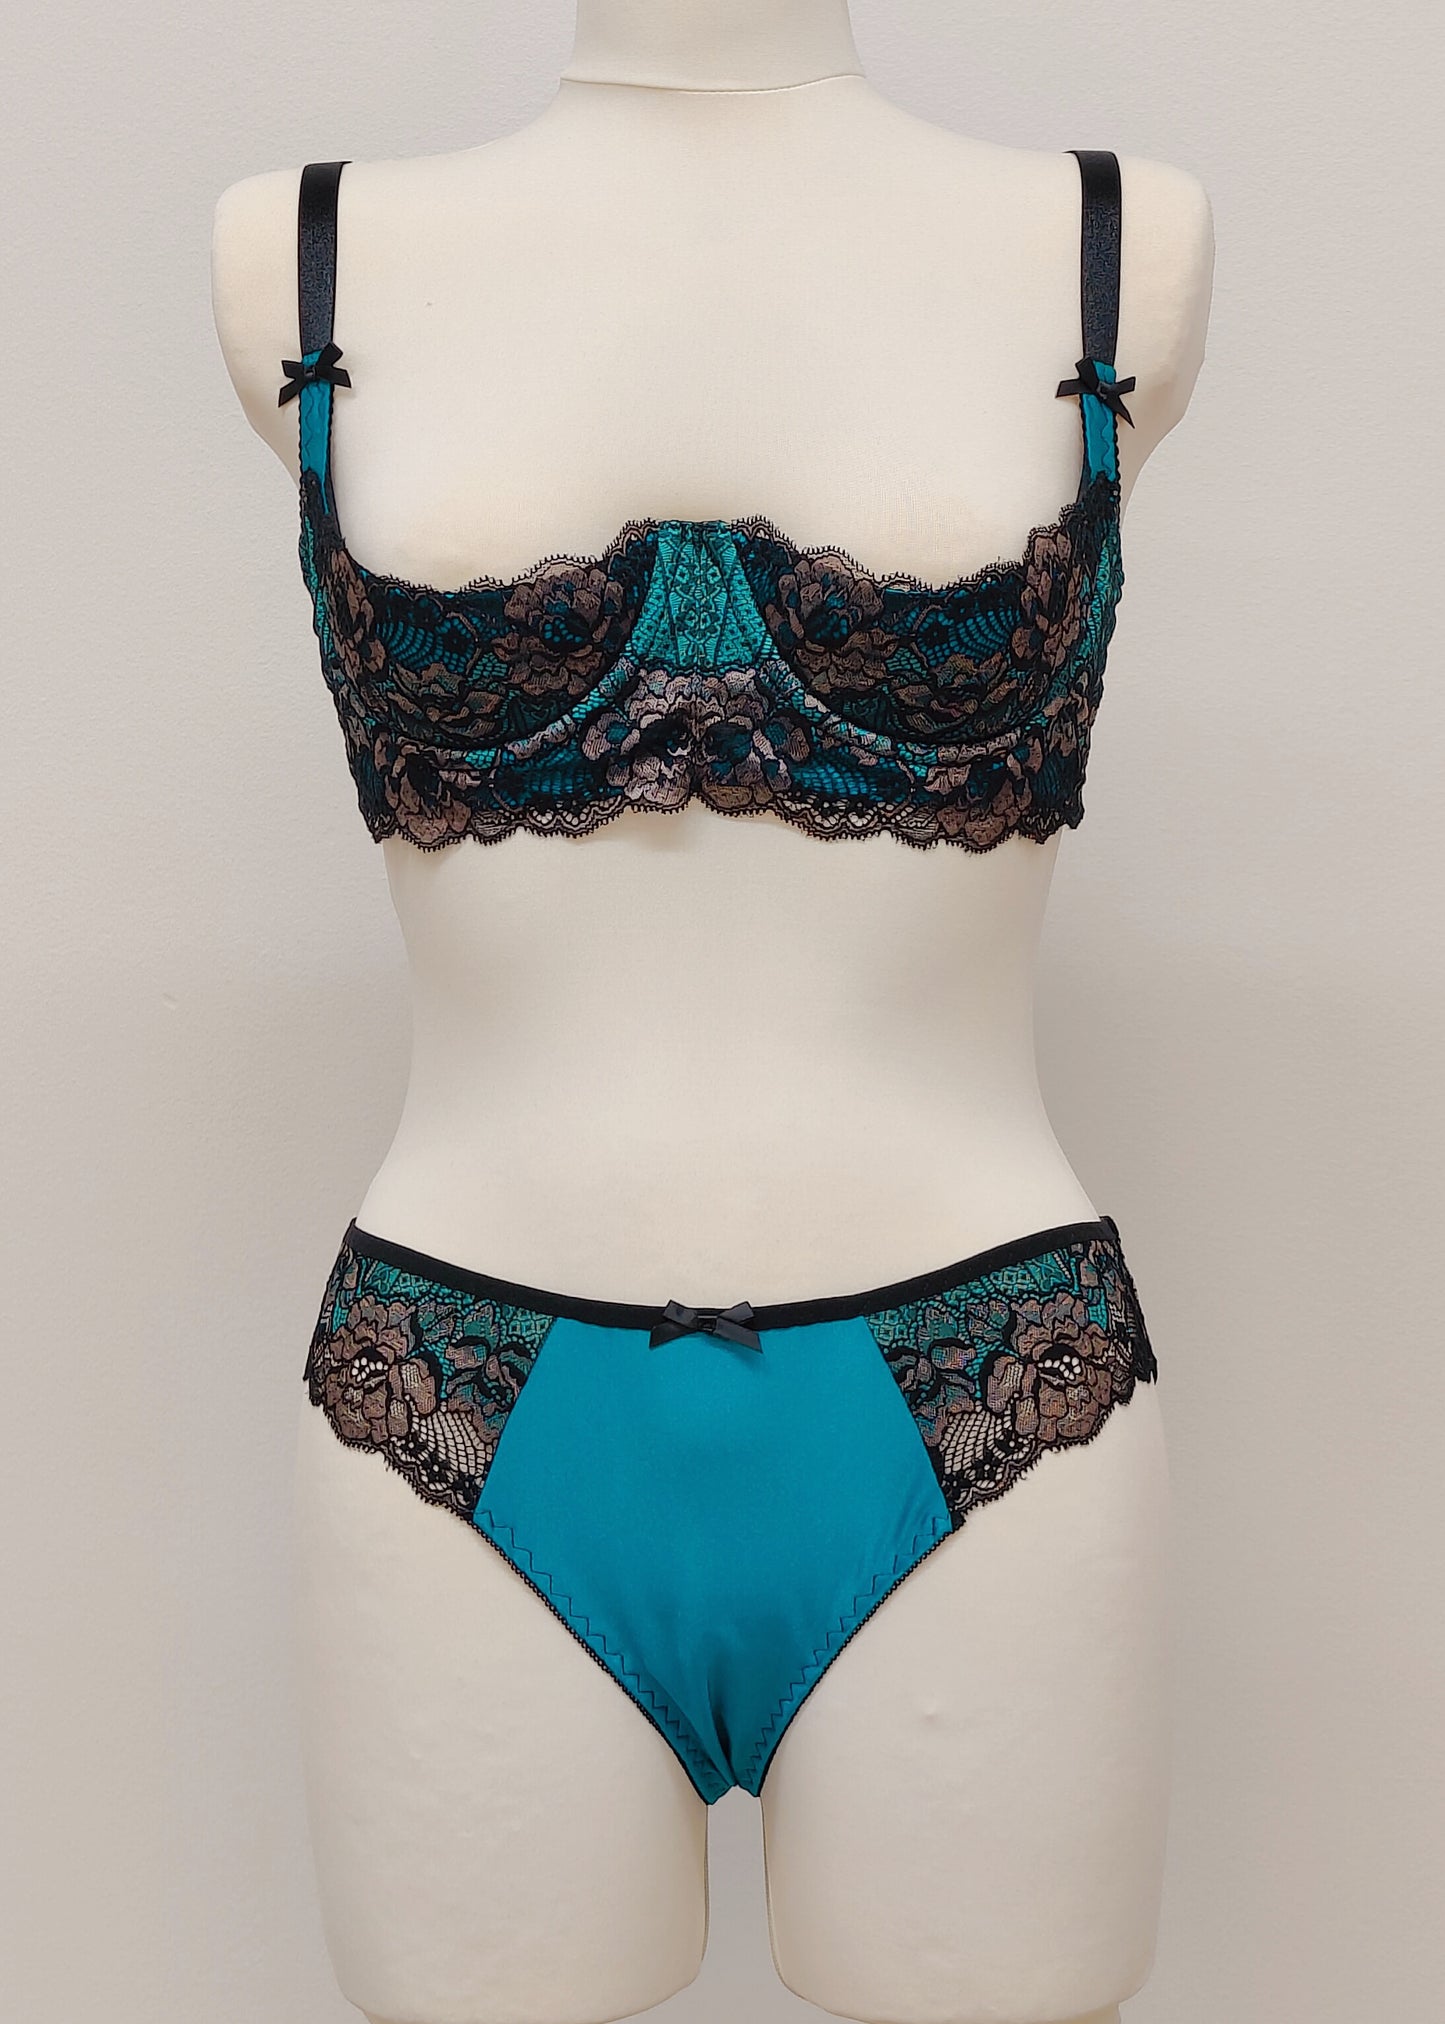 teal and black lace quarter cup bra with panties